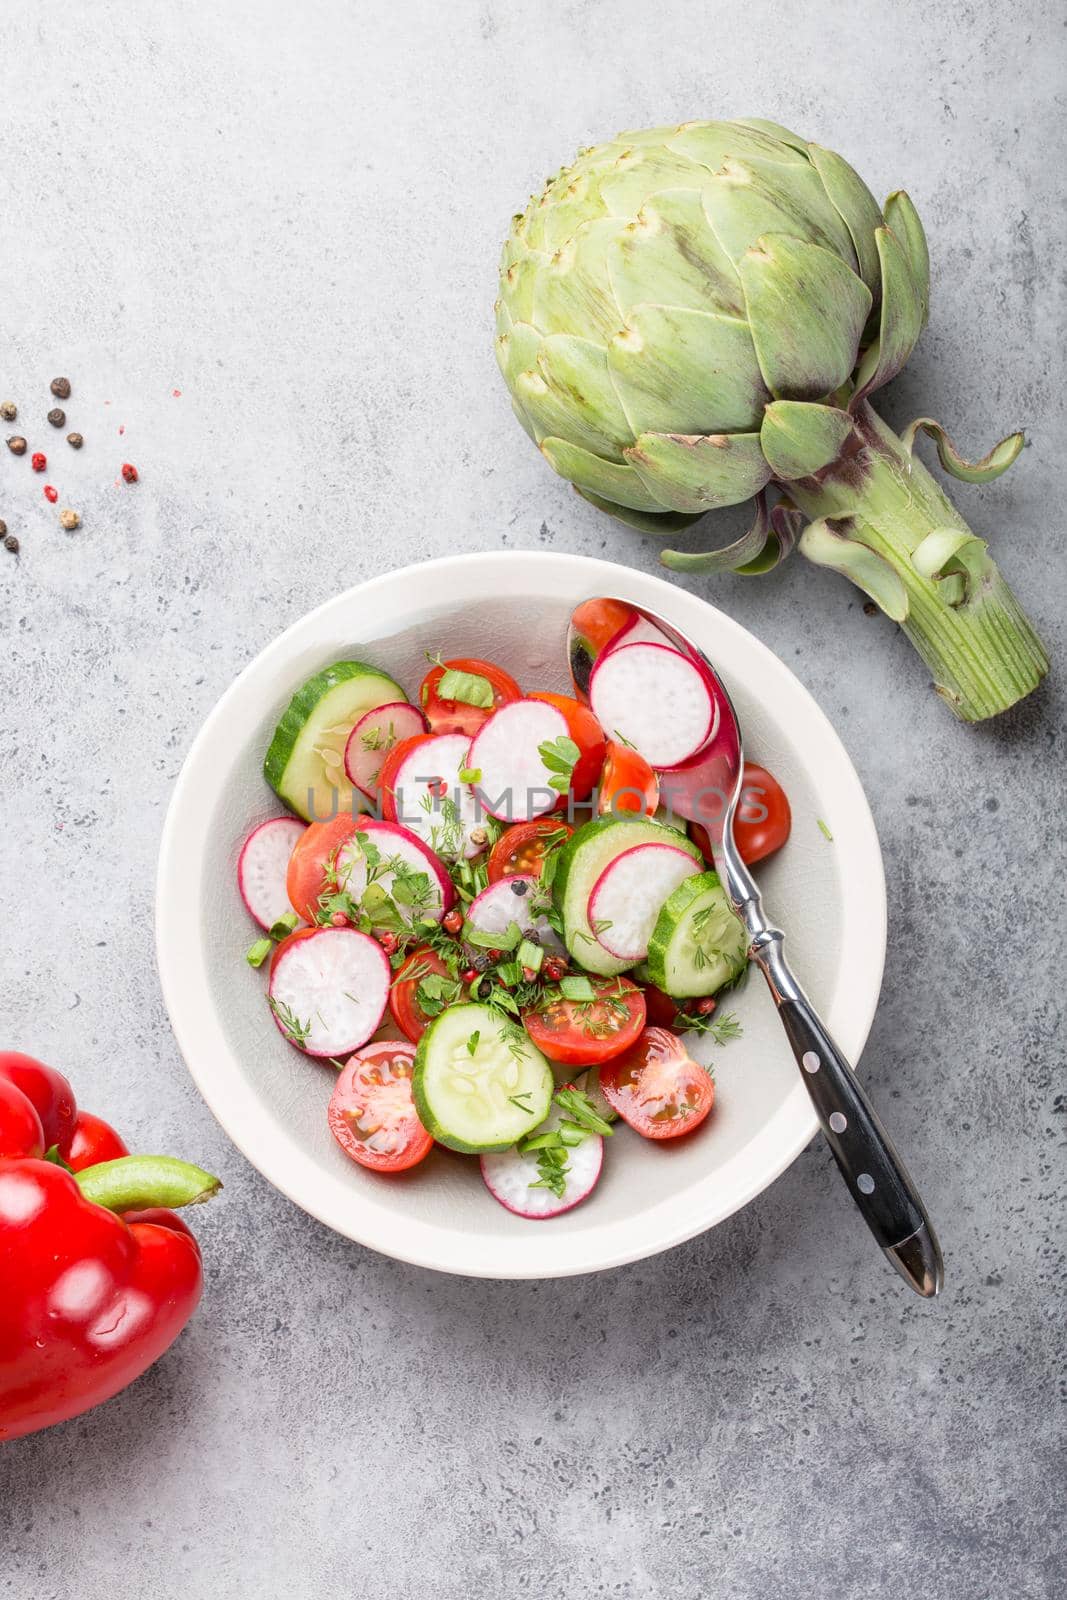 Close-up of fresh healthy salad in a bowl made of tomatoes, cucumber, radish and herbs, with raw artichoke and seasonings, good for diet or detox, grey rustic stone background, top view